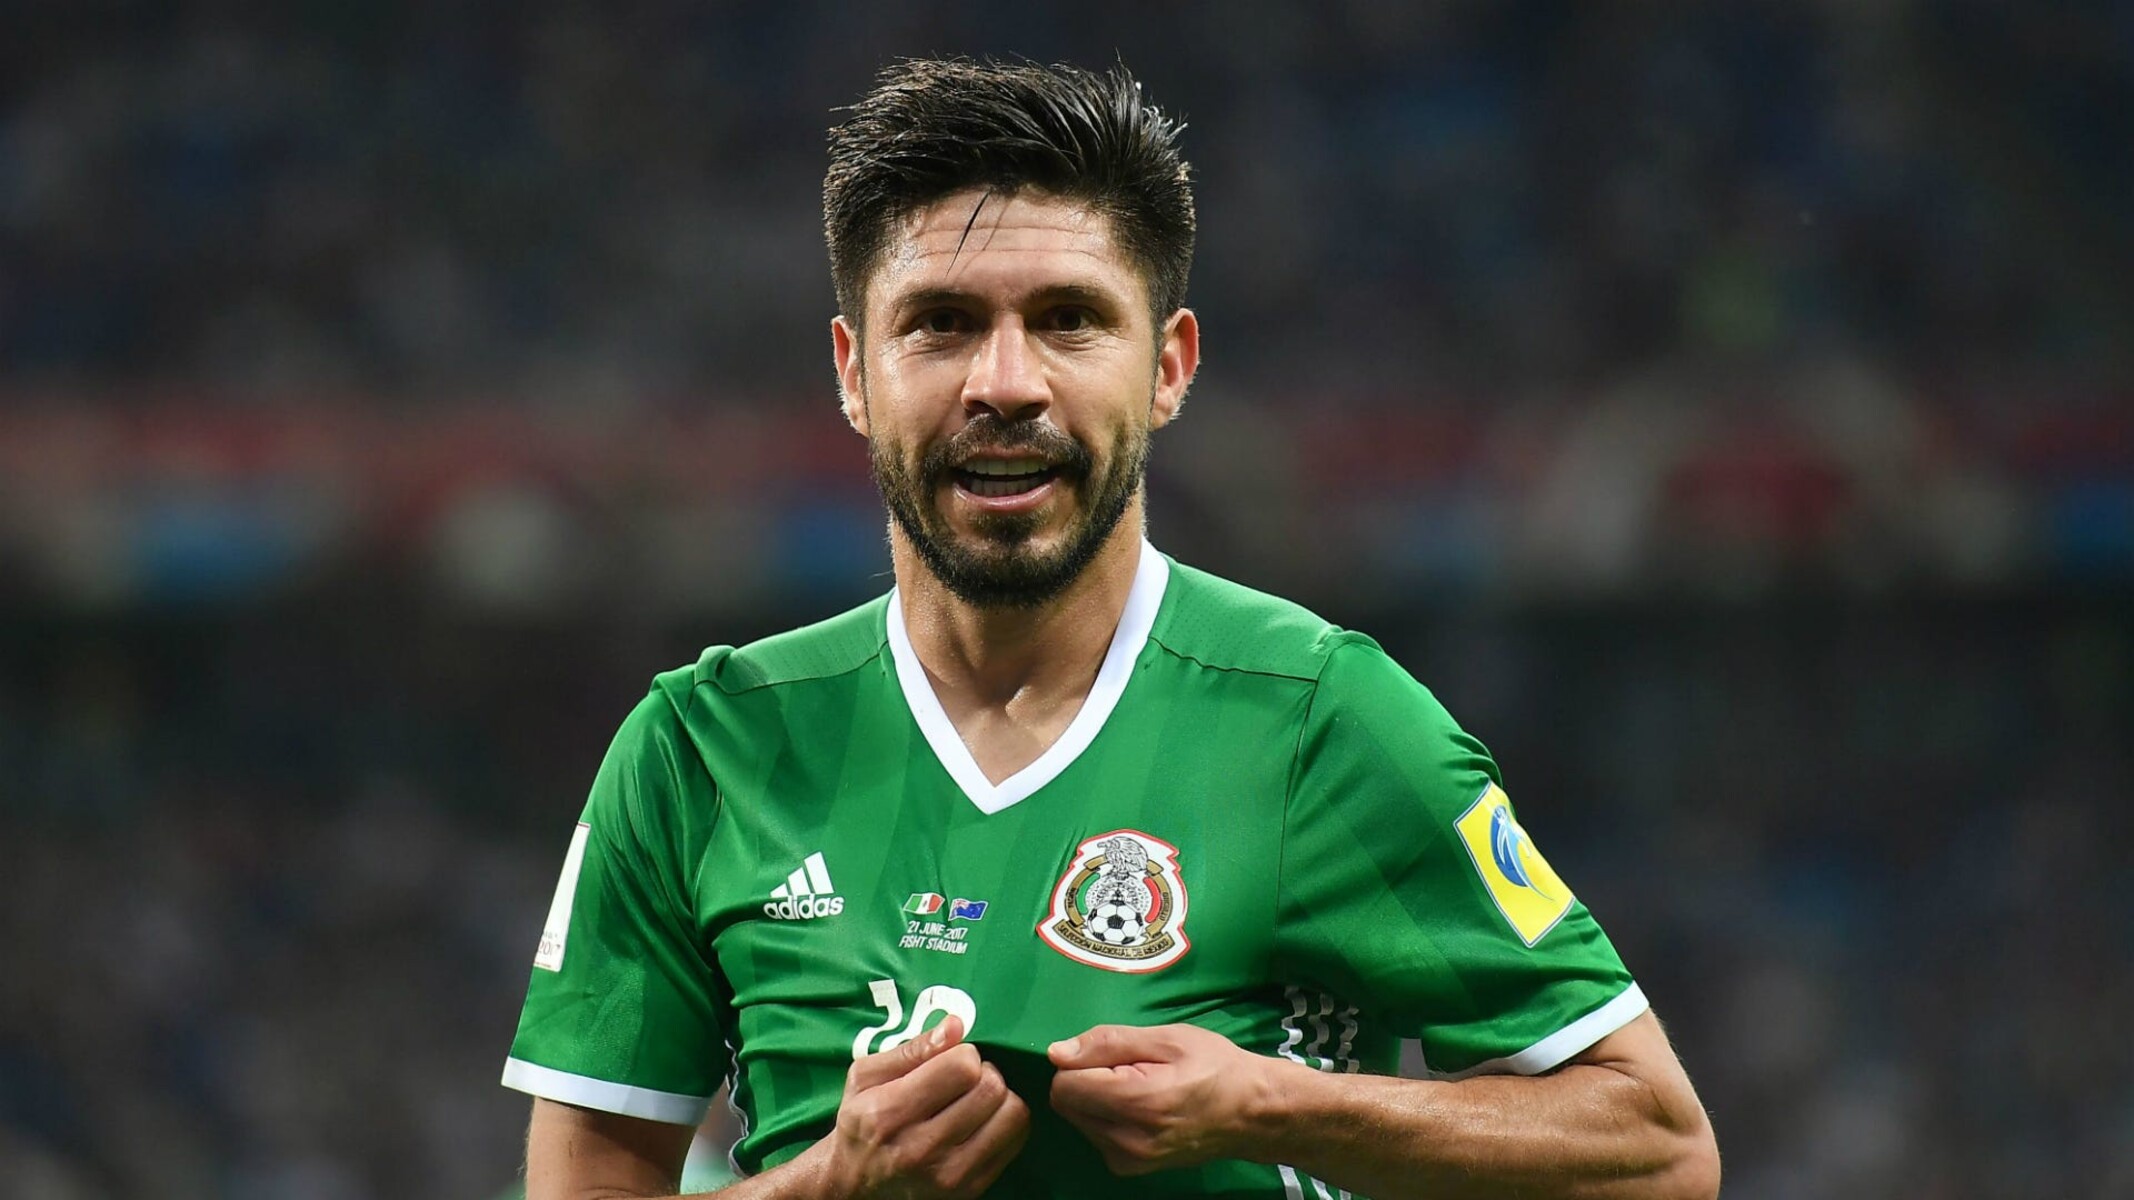 15-intriguing-facts-about-oribe-peralta